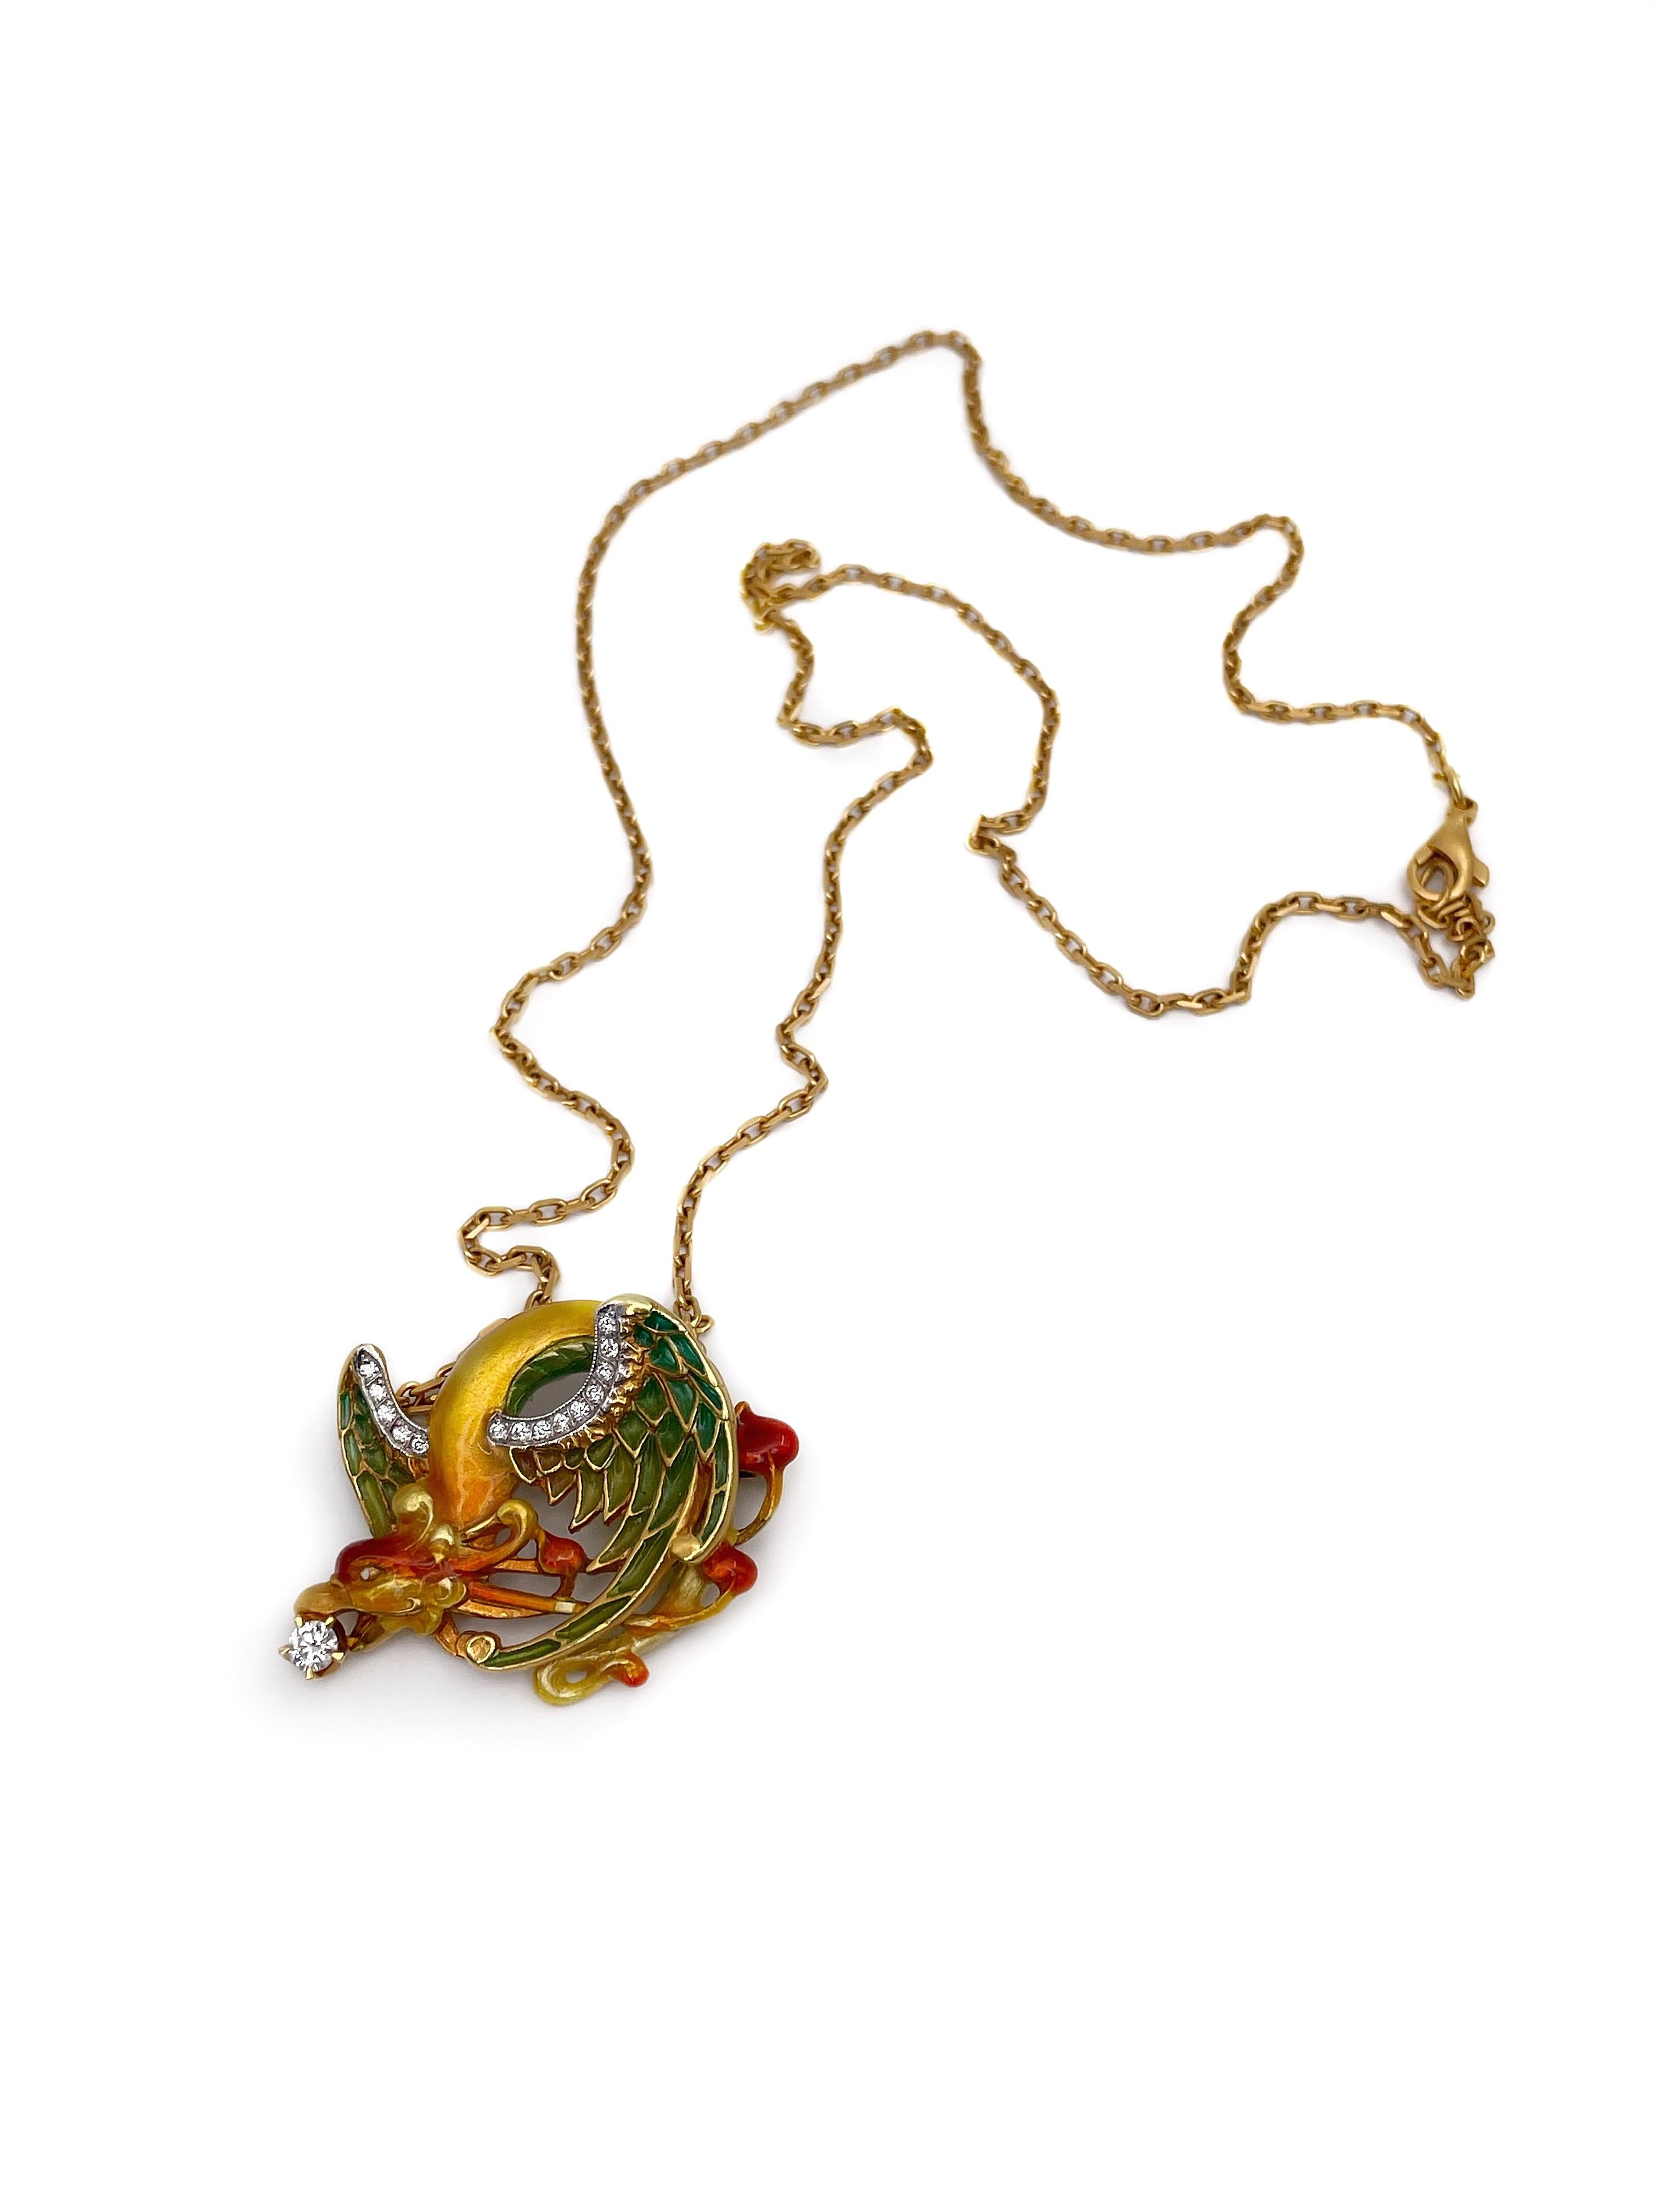 This is a lovely Art Nouveau style necklace designed by Masriera in 1960’s-1970’s. It can also be worn as a brooch. The piece depicts a dragon and is crafted in 18K yellow gold. 

It features 15 round brilliant cut diamonds: 
- 1pc. (0.13ct, RW+/RW,